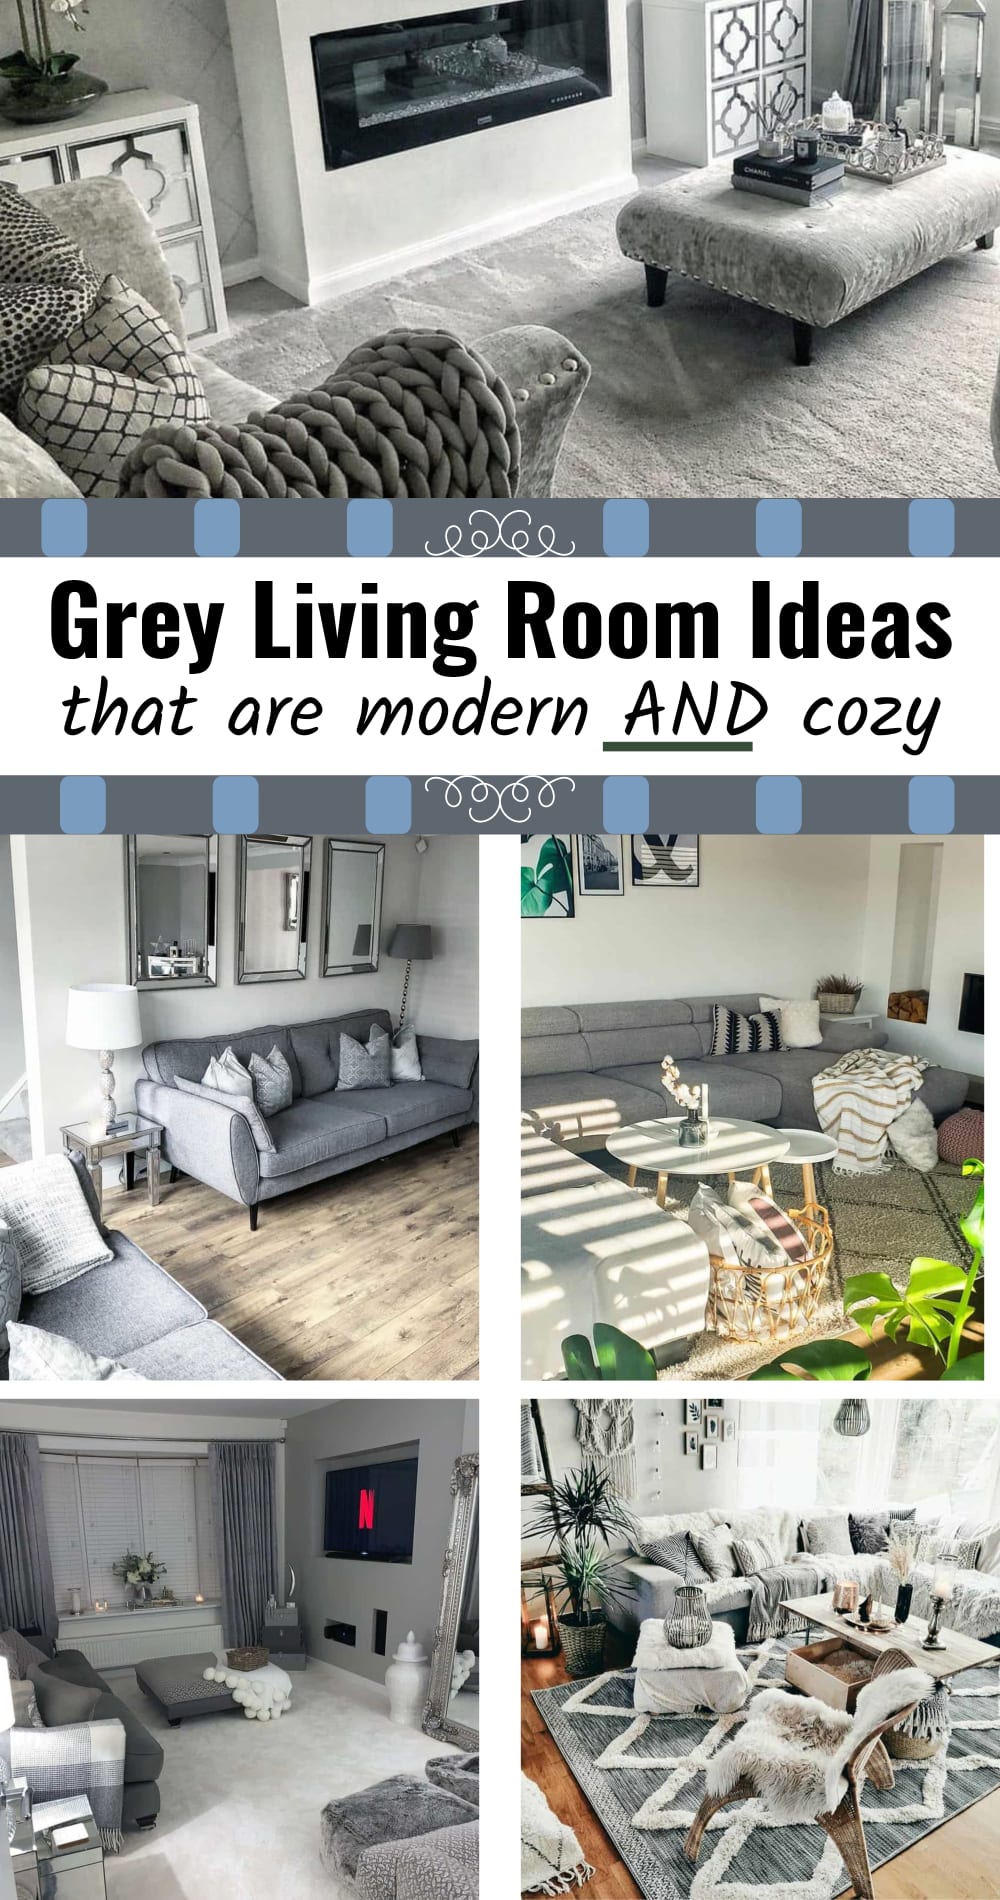 Living room ideas-grey living room ideas, color schemes, pops of color and more for a cozy grey living room.